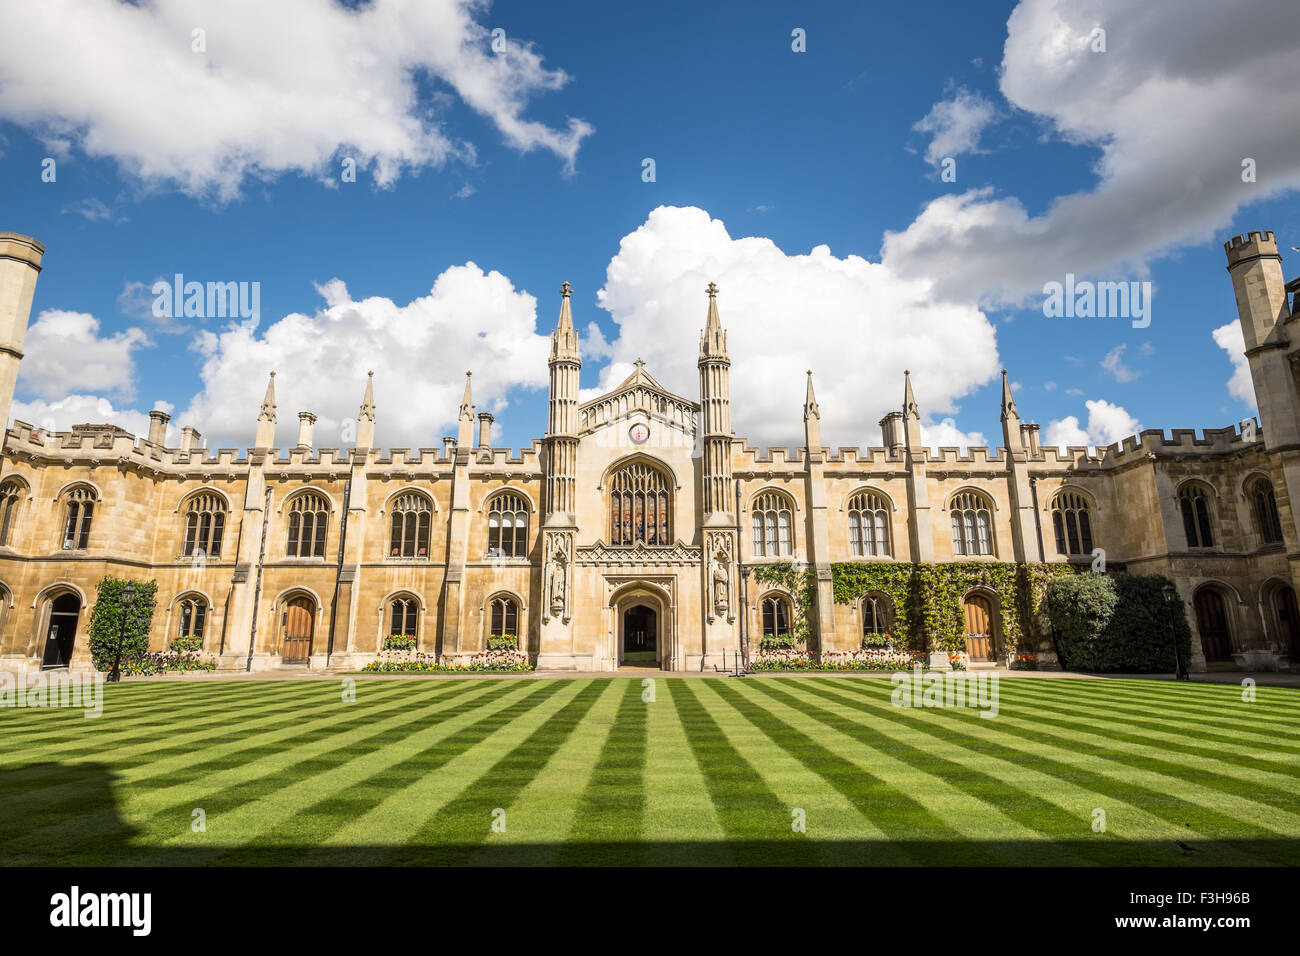 Landscape view of Corpus Christi College Cambridge england with stripped lawn. Stock Photo